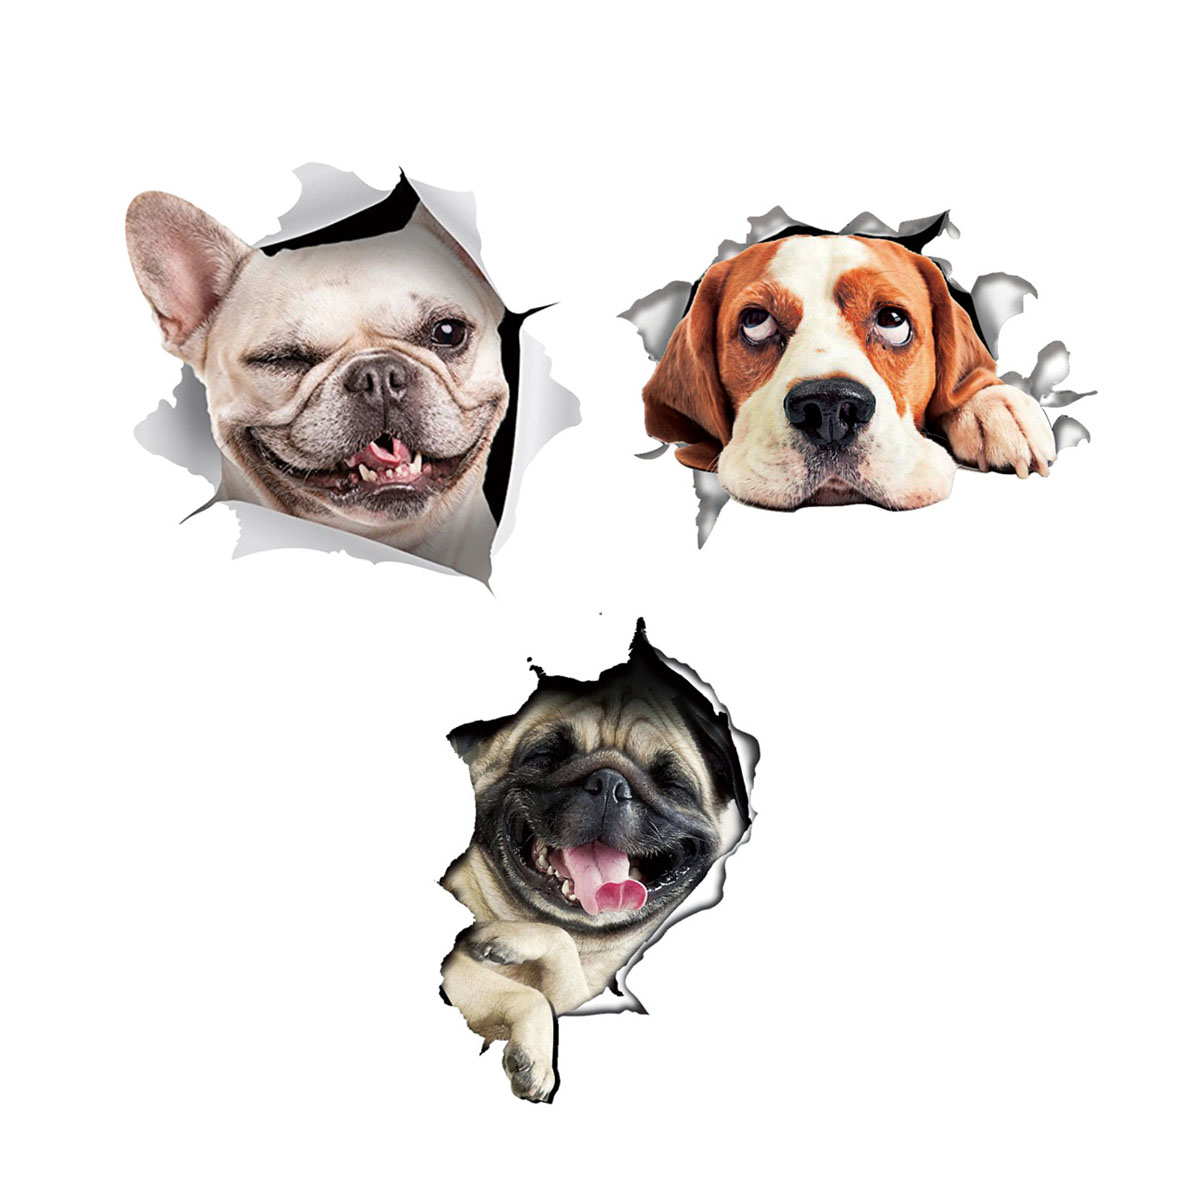 

3D Stereo Animal Car Stickers Creative Dog Windows Cute Decals Auto Ornament